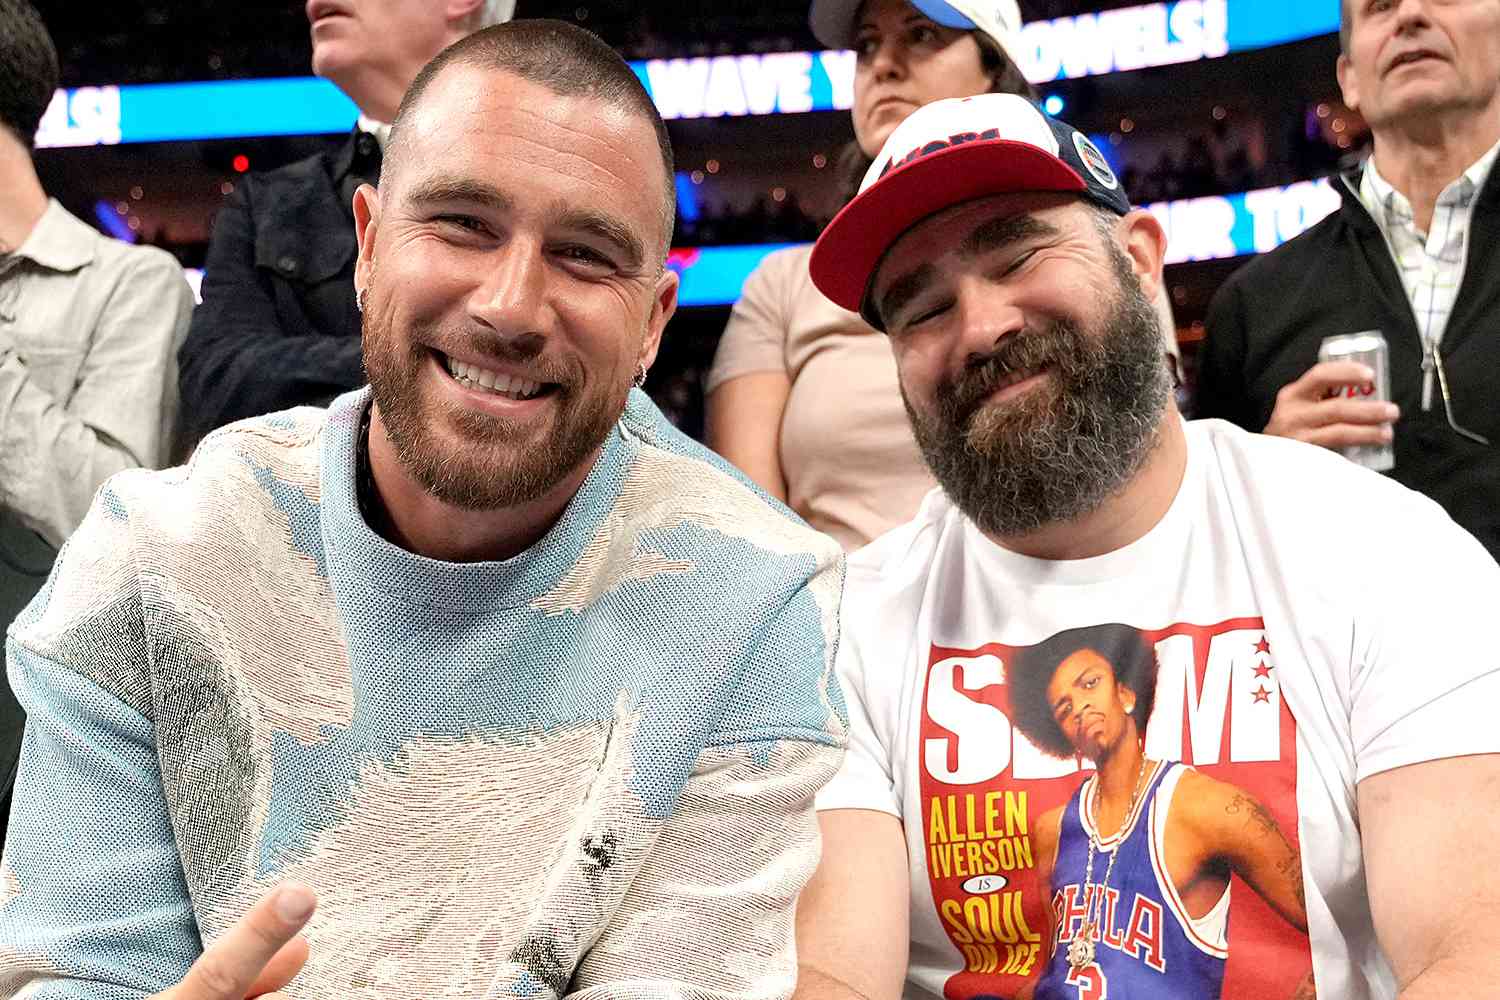 "Lucky to have you as a big bro," Travis Kelce joyfully celebrates the 37th birthday of his brother, Jason Kelce.